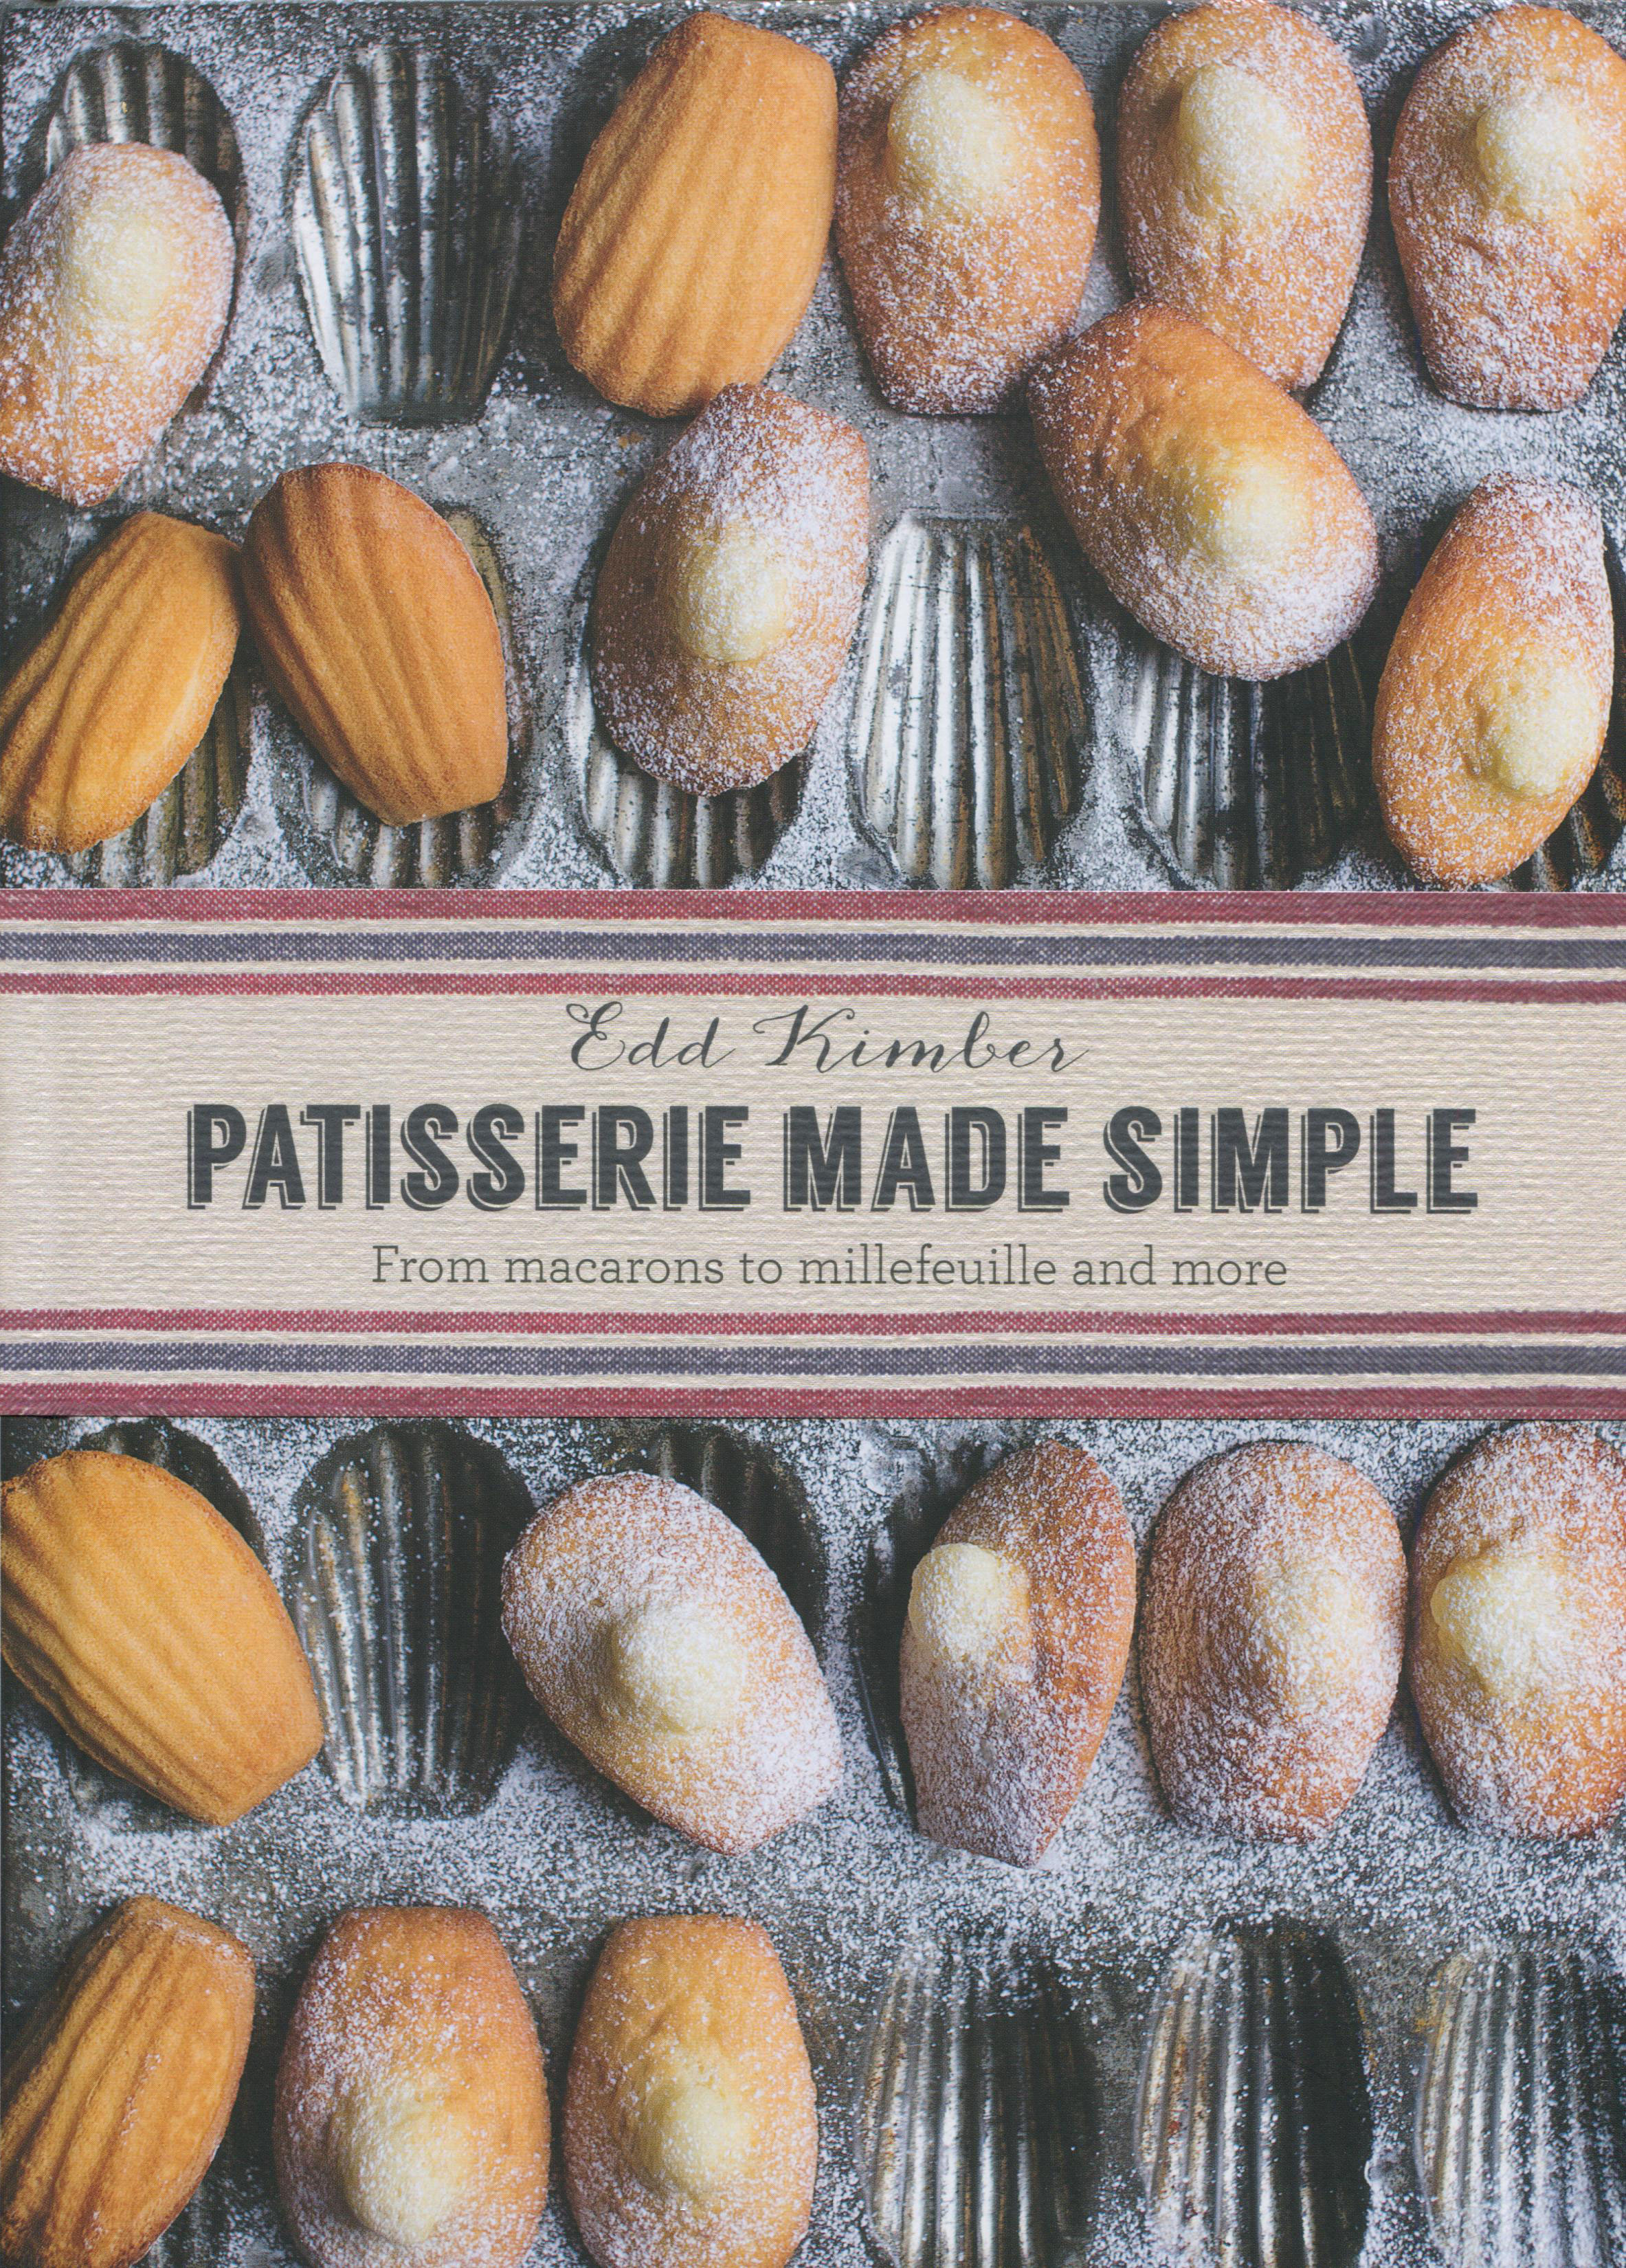 TBT Cookbook Review: Patisserie Made Simple by Edd Kimber